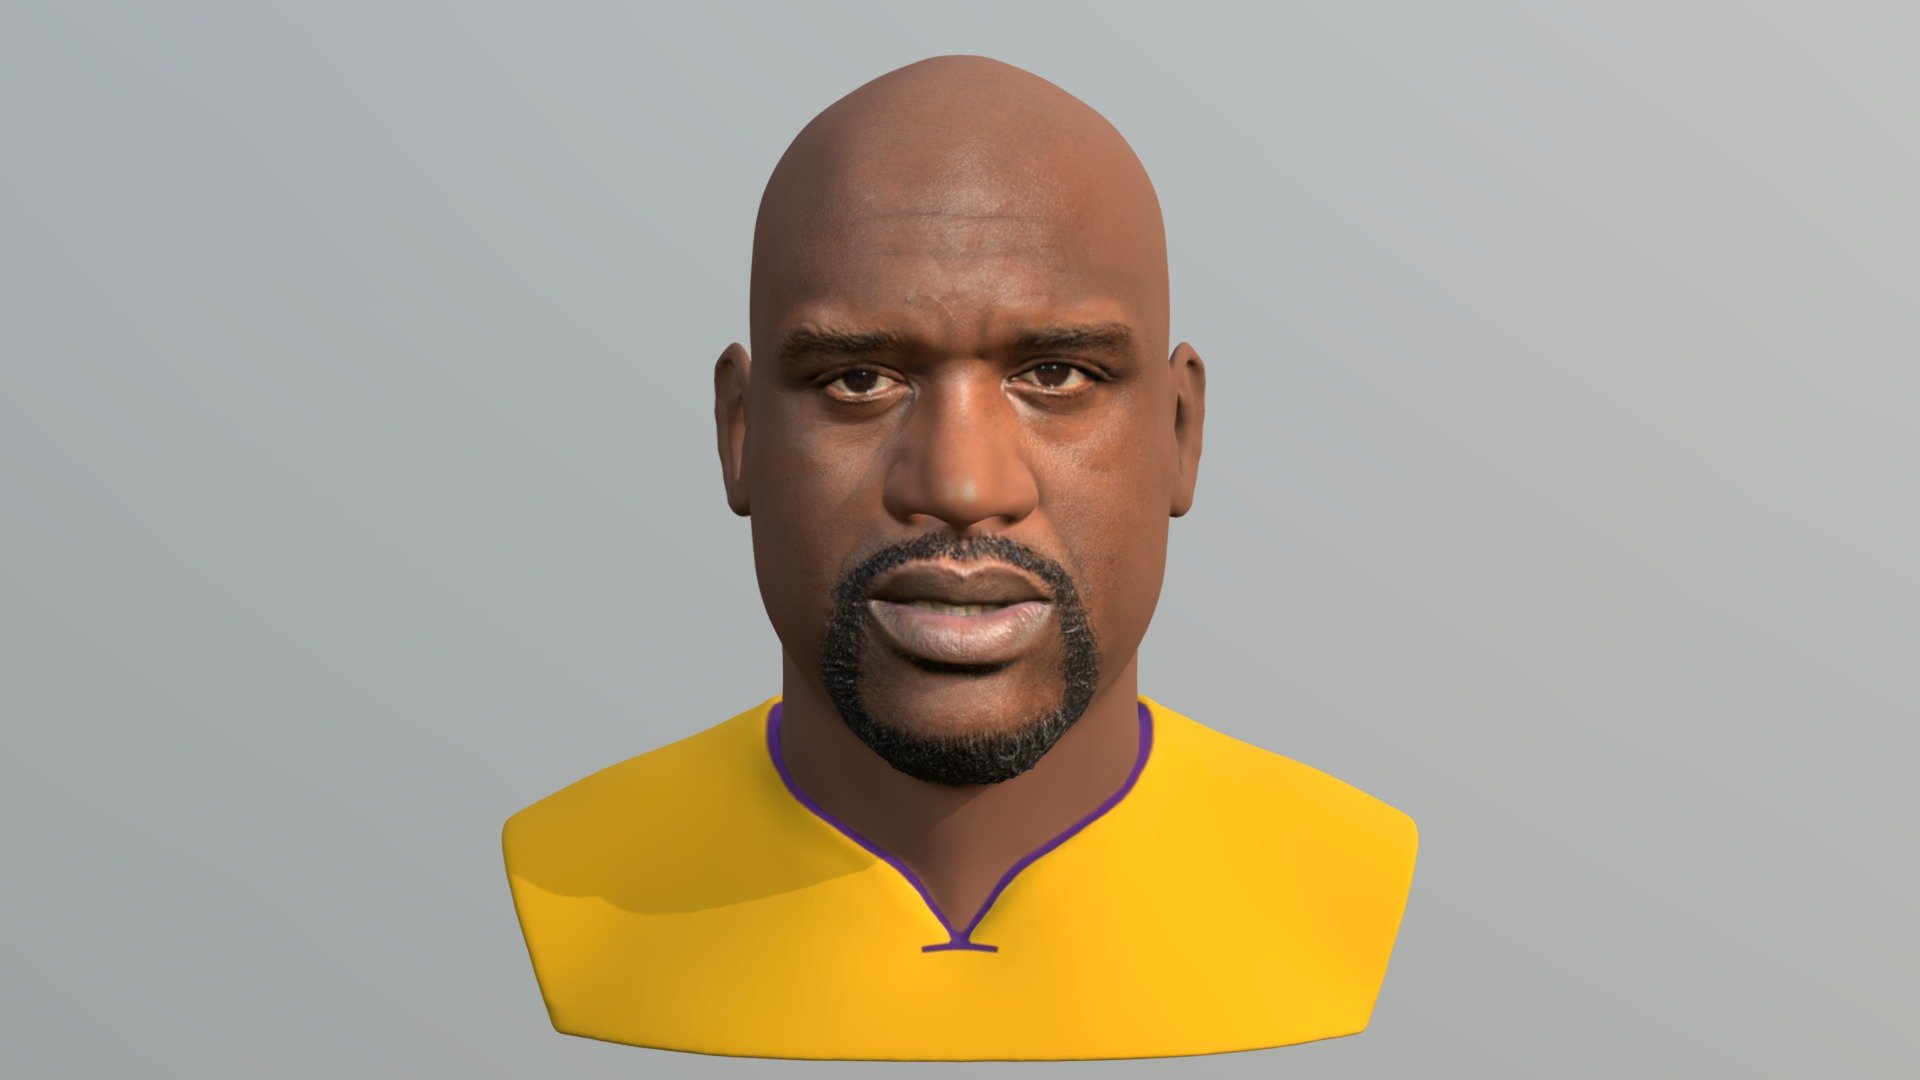 Here is Shaquille O'Neal bust 3D model ready for full color 3D printing. The model current size is 5 cm height, but you are free to scale it. 
Zip file contains obj with texture in png. 
The model was created in ZBrush, Mudbox and Photoshop.

If you have any questions please don't hesitate to contact me. I will respond you ASAP. 
I encourage you to check my other celebrity 3D models 3d model